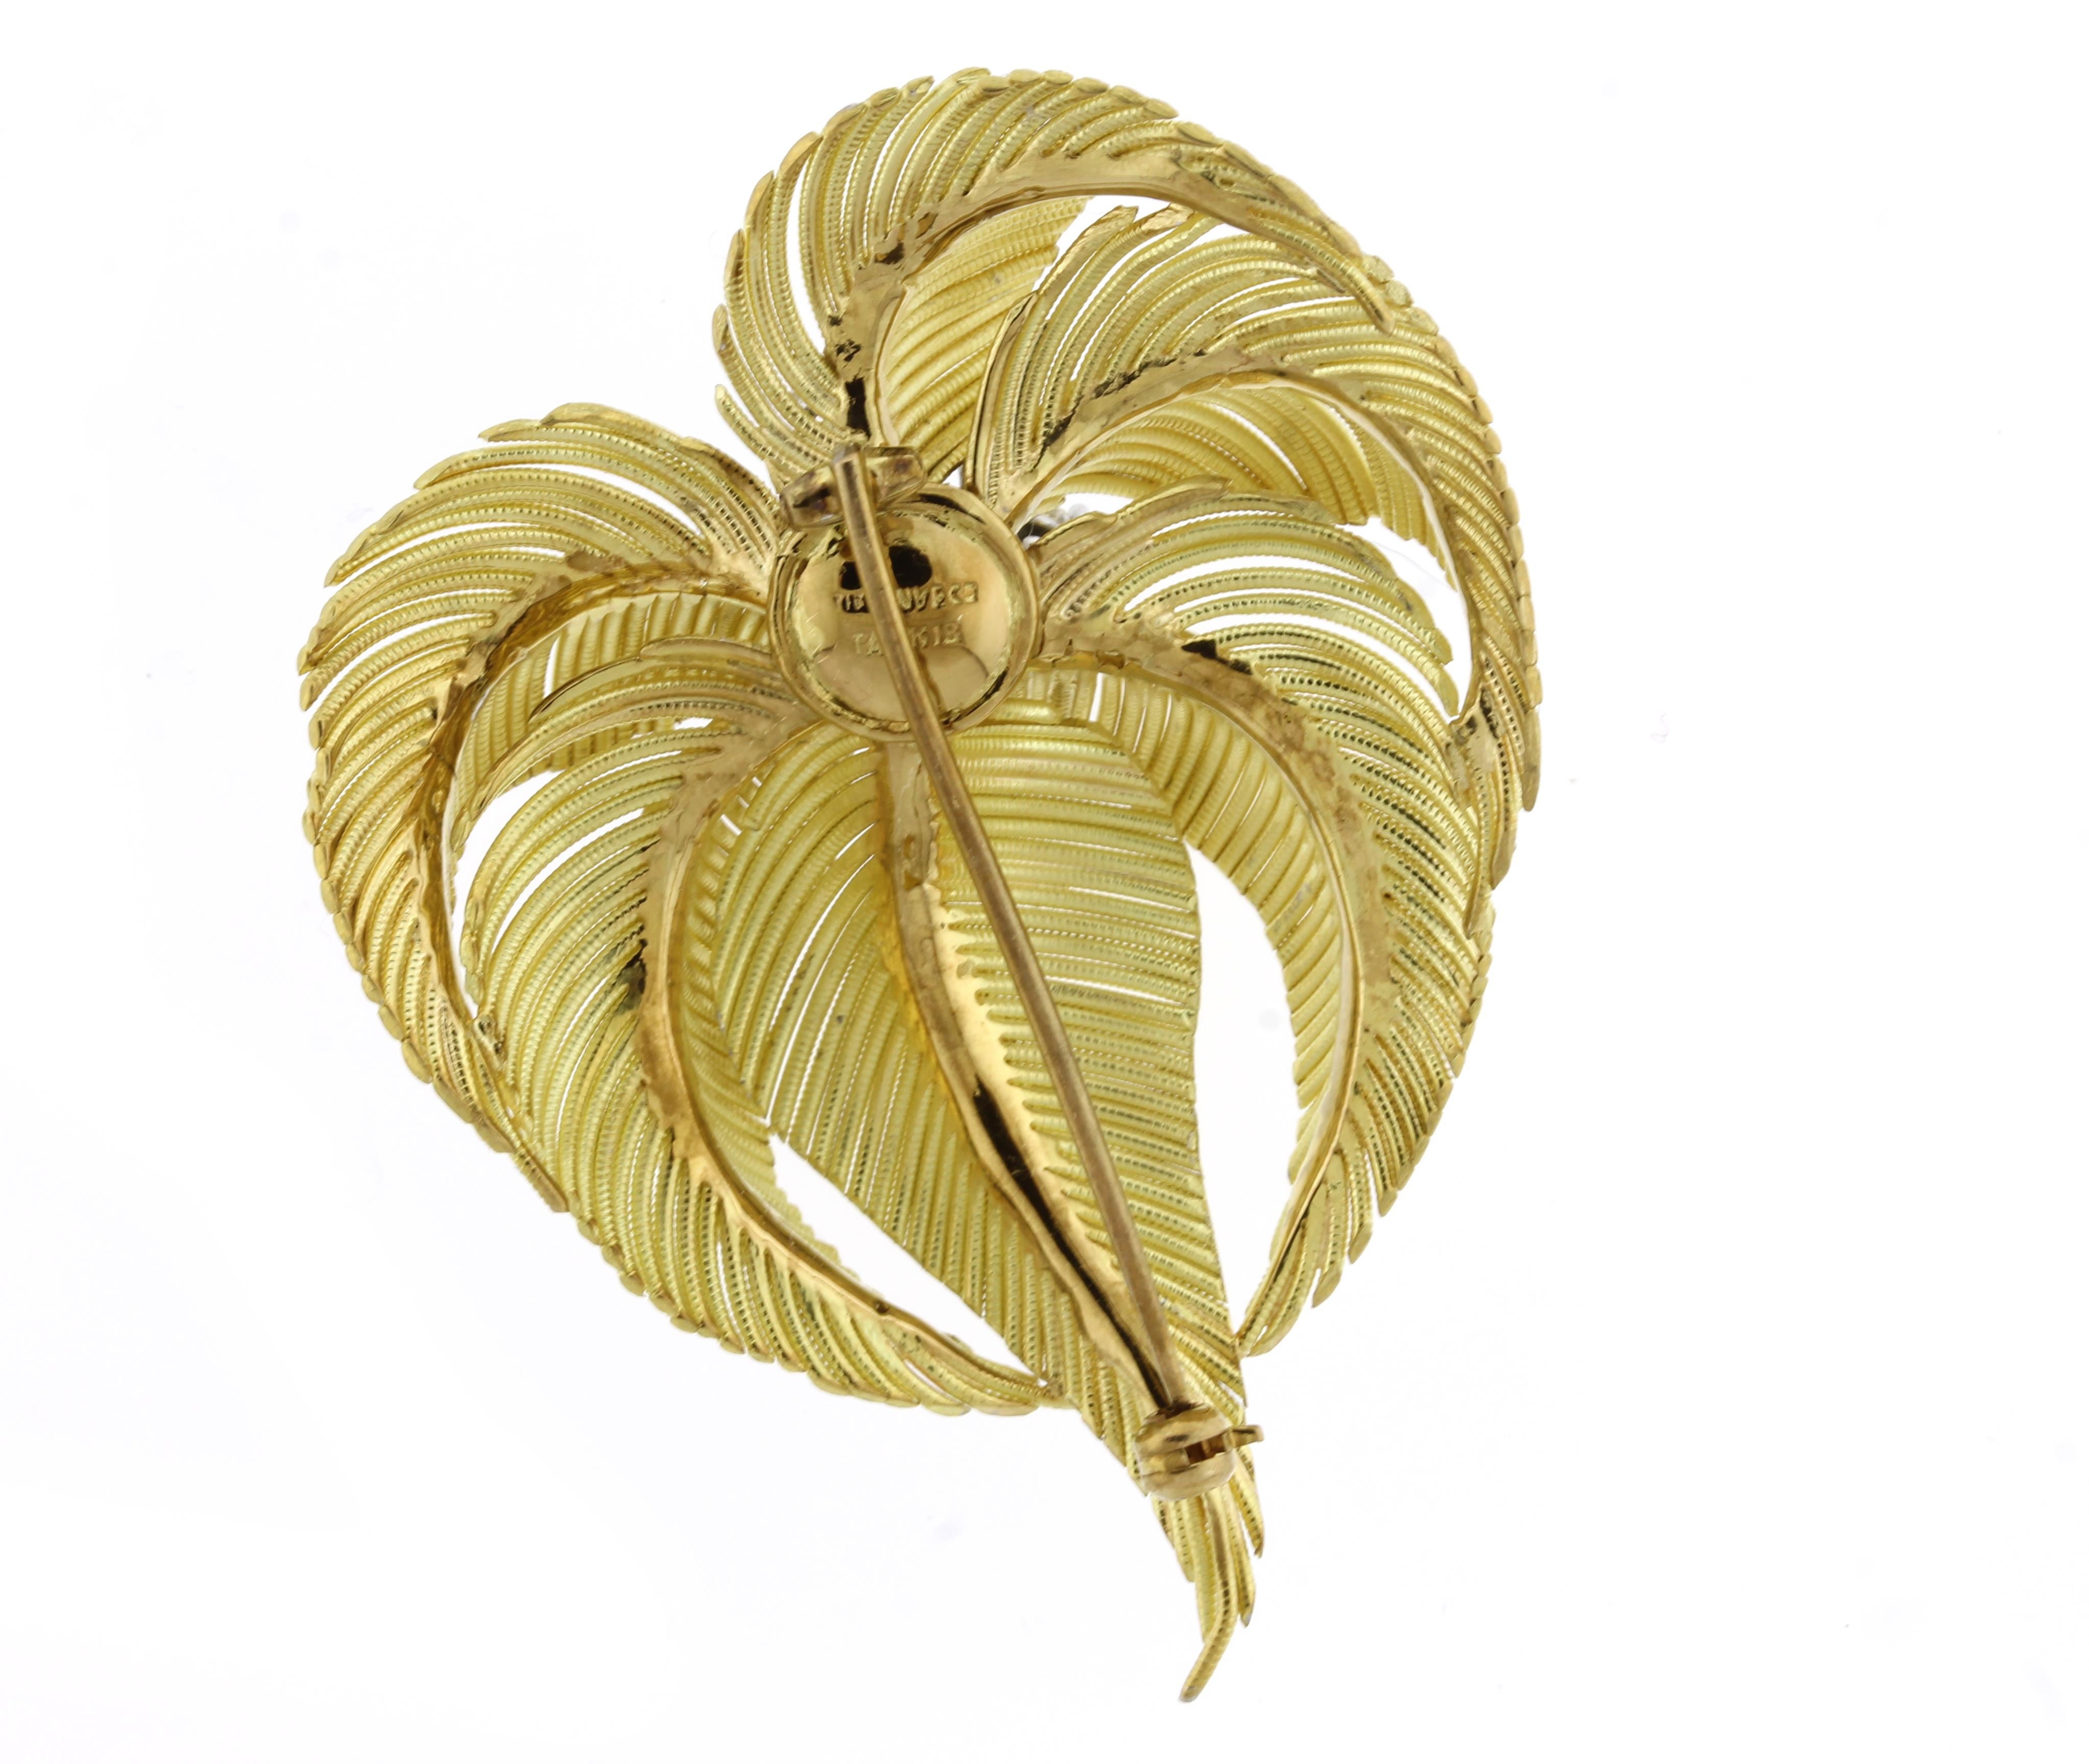 Tiffany & Co. Gold Palm Diamond Statement Brooch In Excellent Condition For Sale In Bethesda, MD